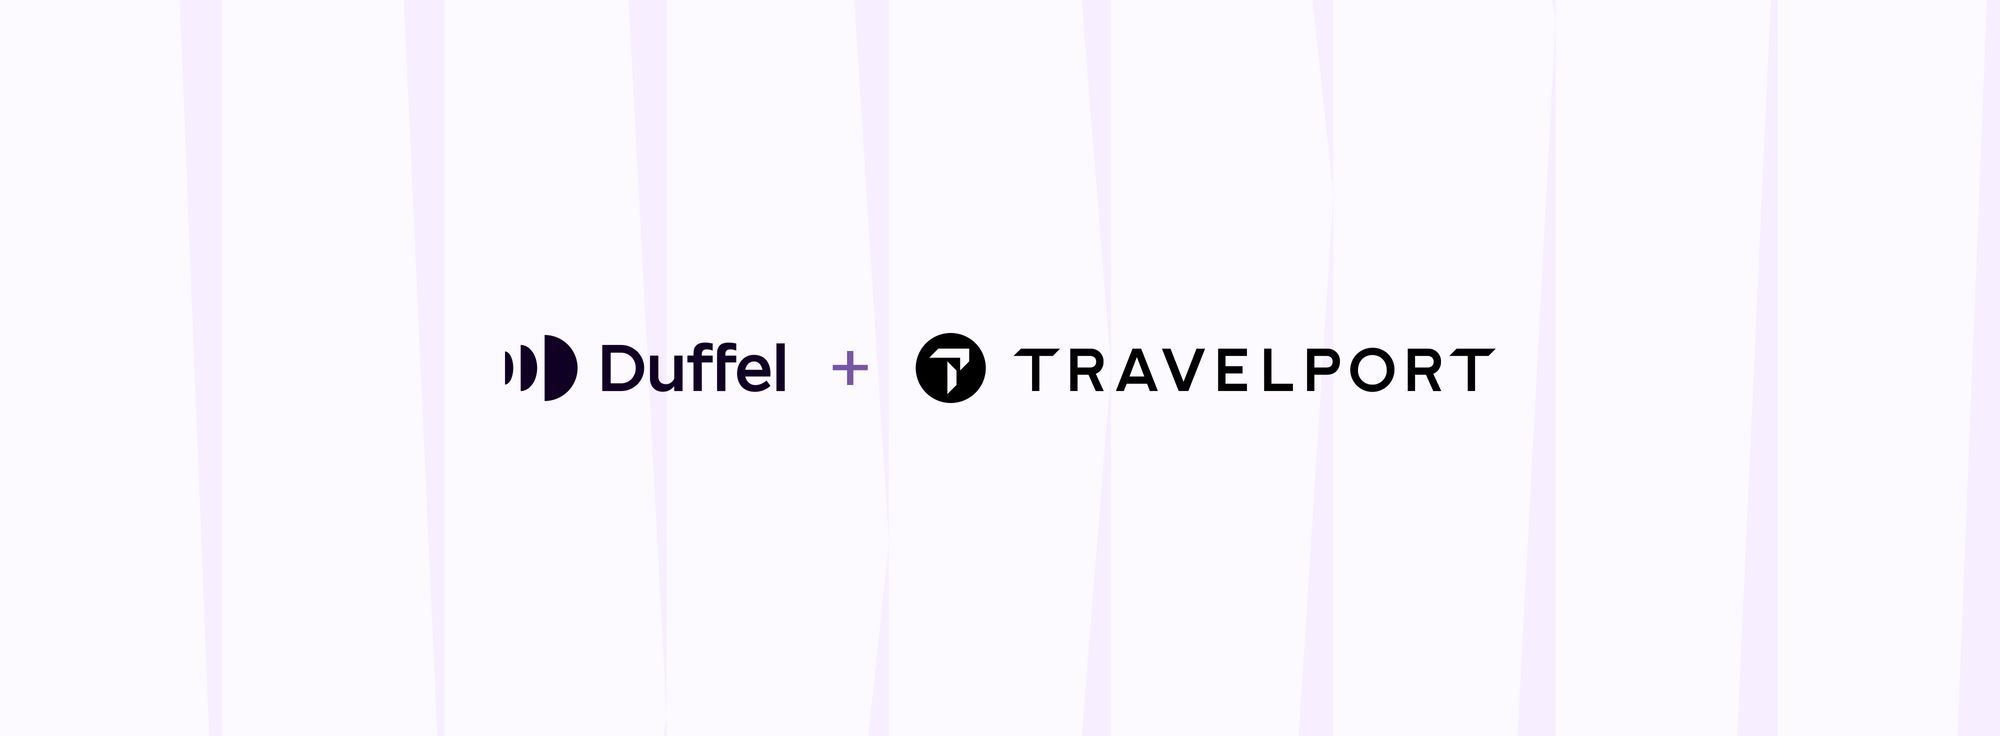 Duffel now offers more choice in airlines, covering nearly 80% of target markets